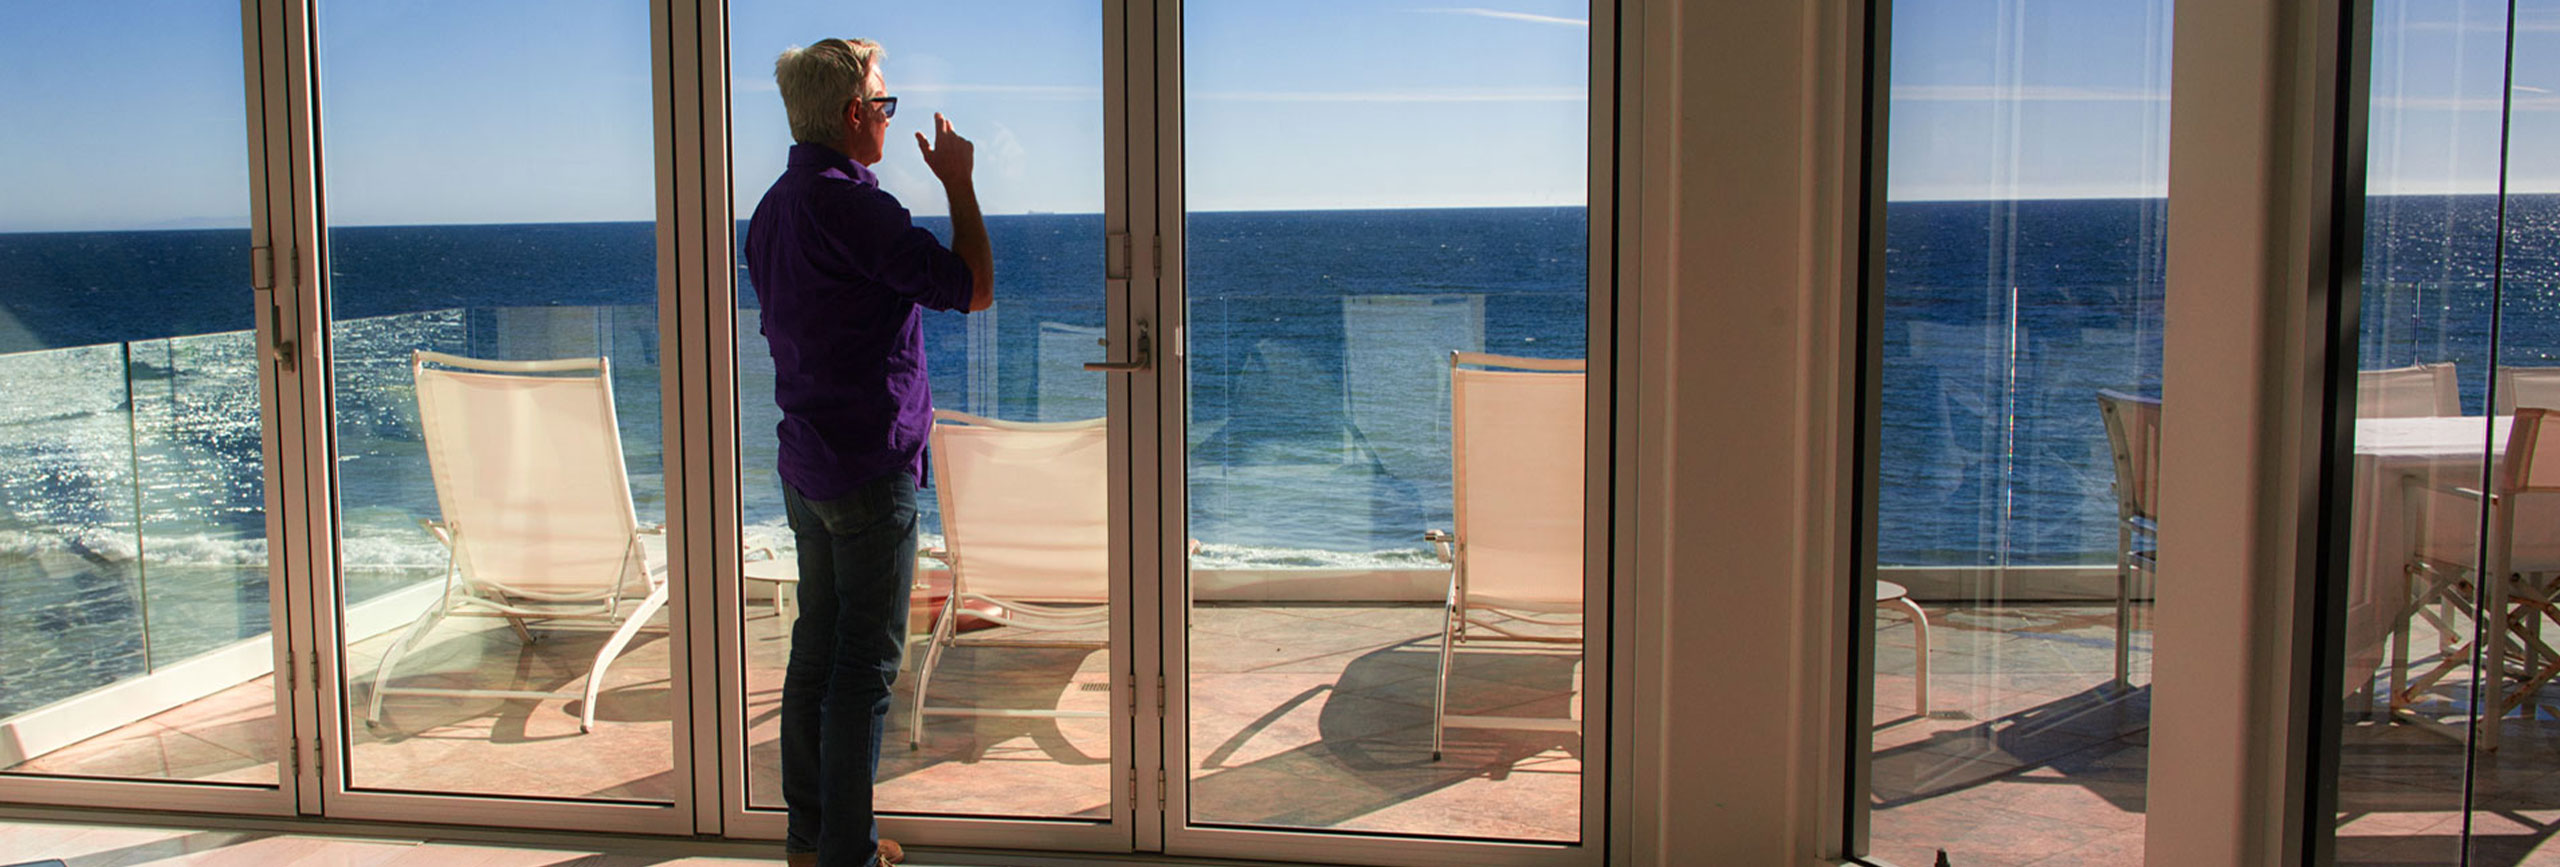 Alcohol rehab patient looking at the ocean out the window of The Pointe Malibu Recovery Center.